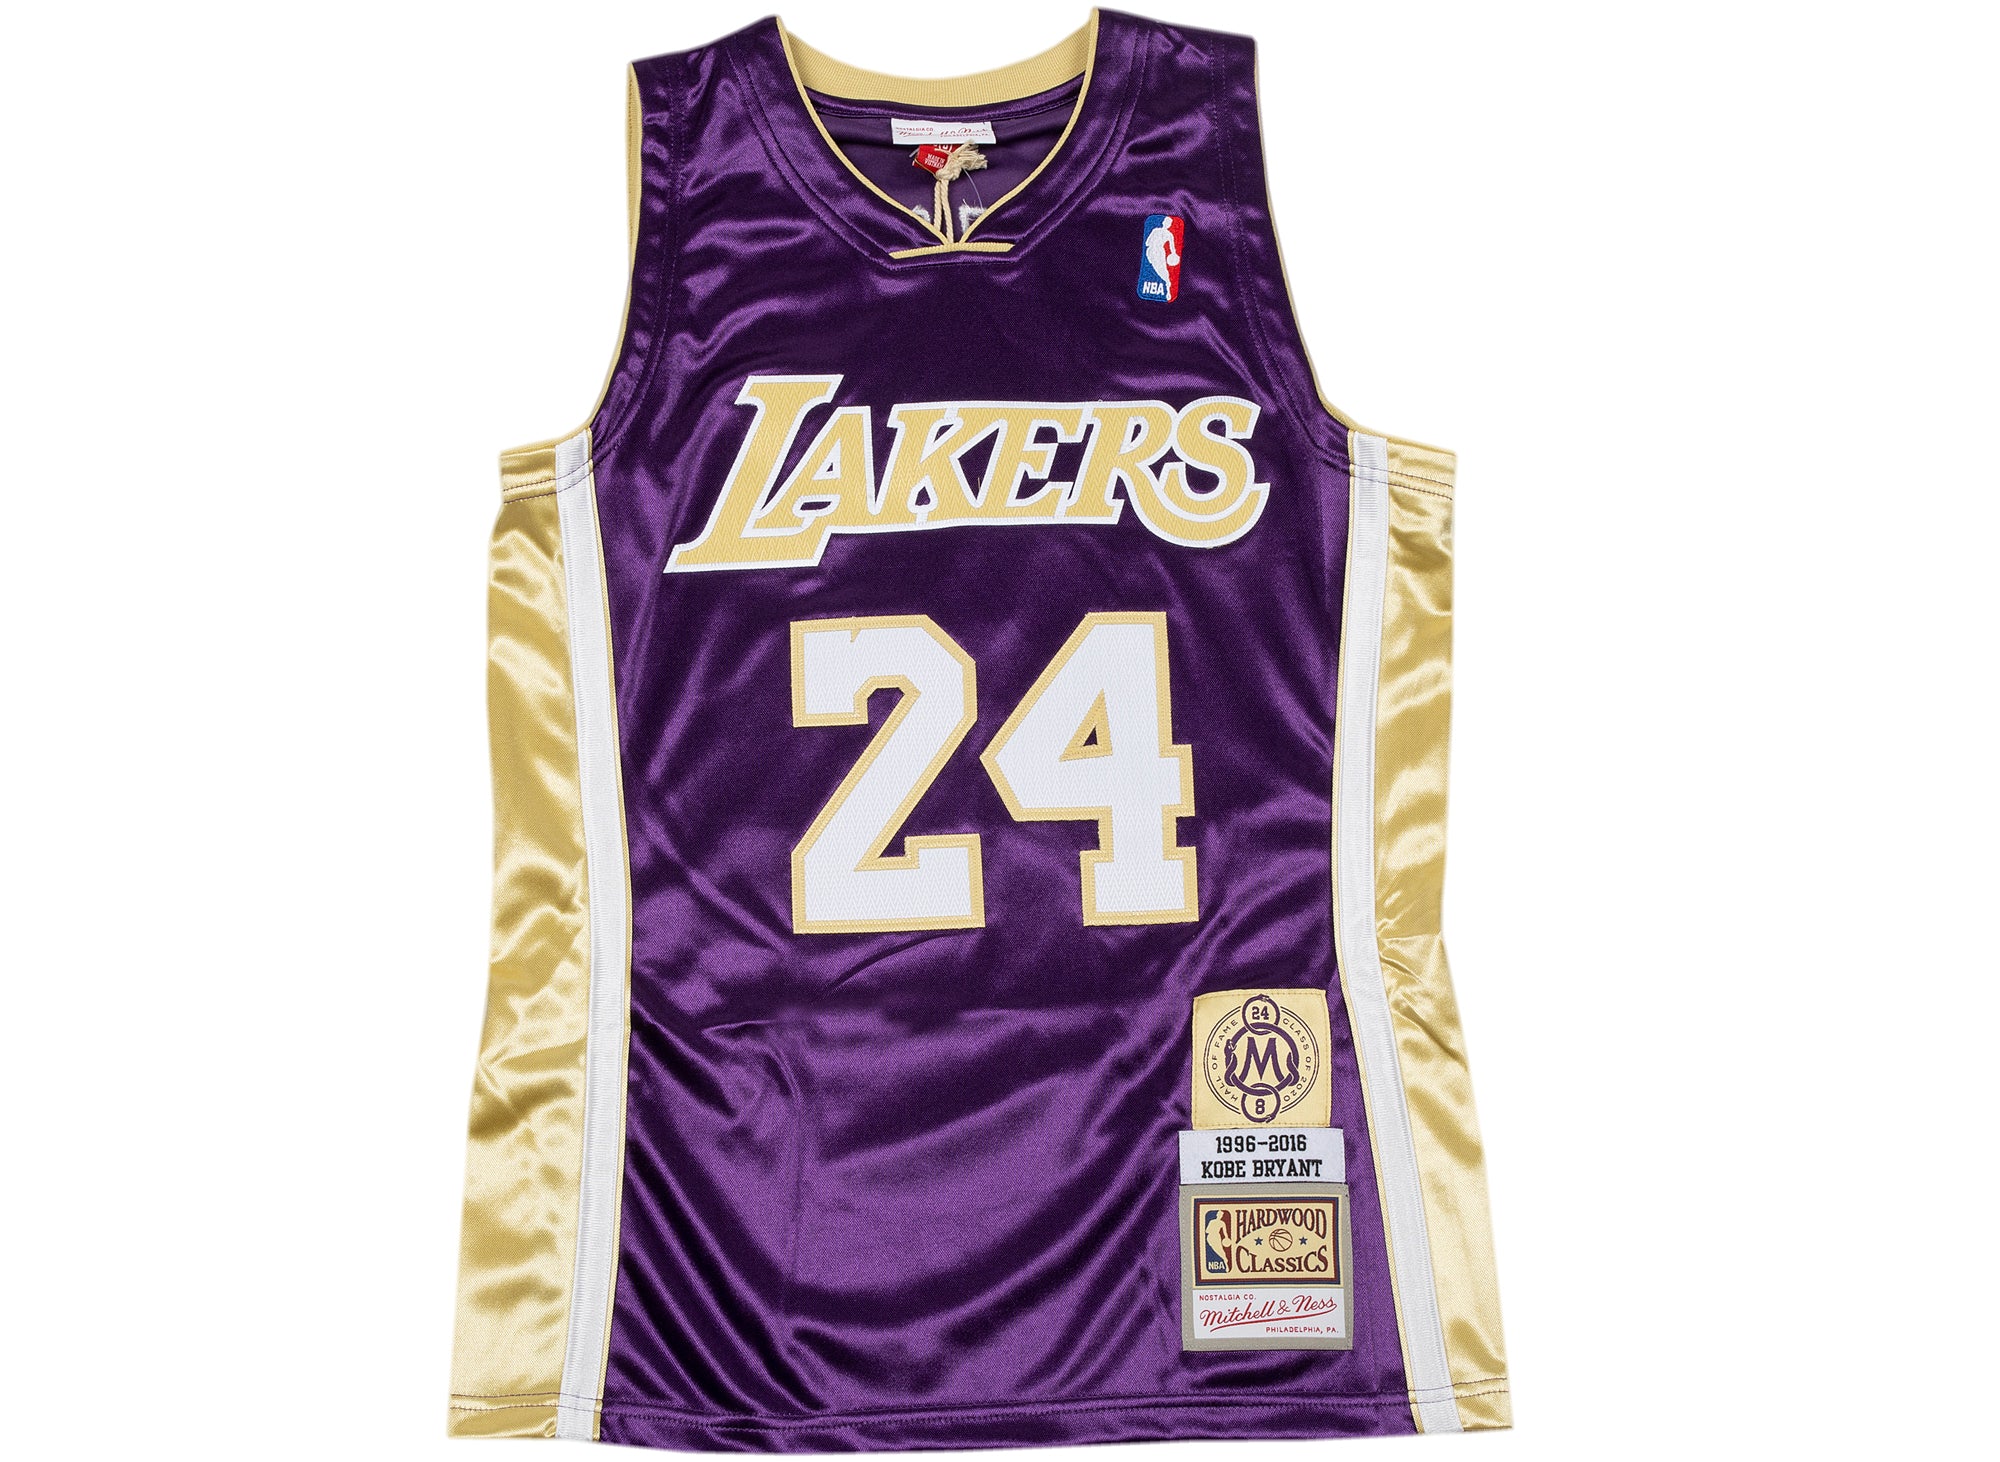 NBA AUTHENTIC JERSEY LAKERS 96 Kobe Bryant HALL OF FAME x MITCHELL